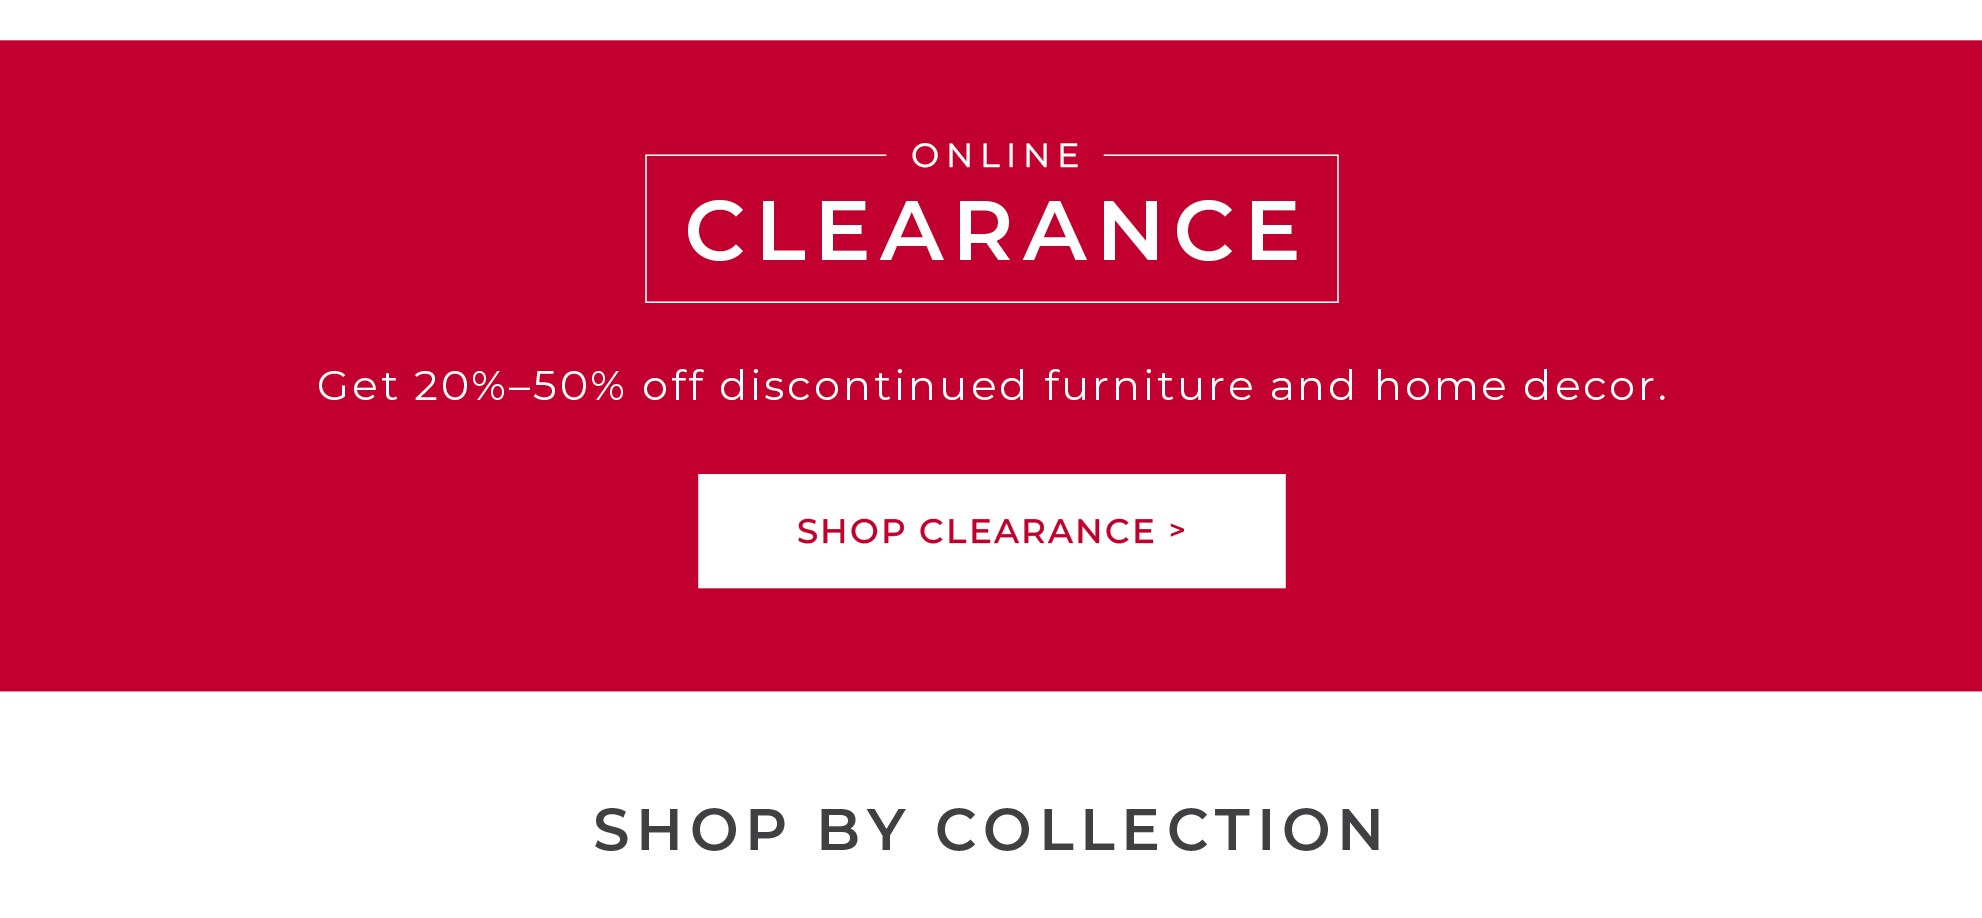 Shop clearance items.